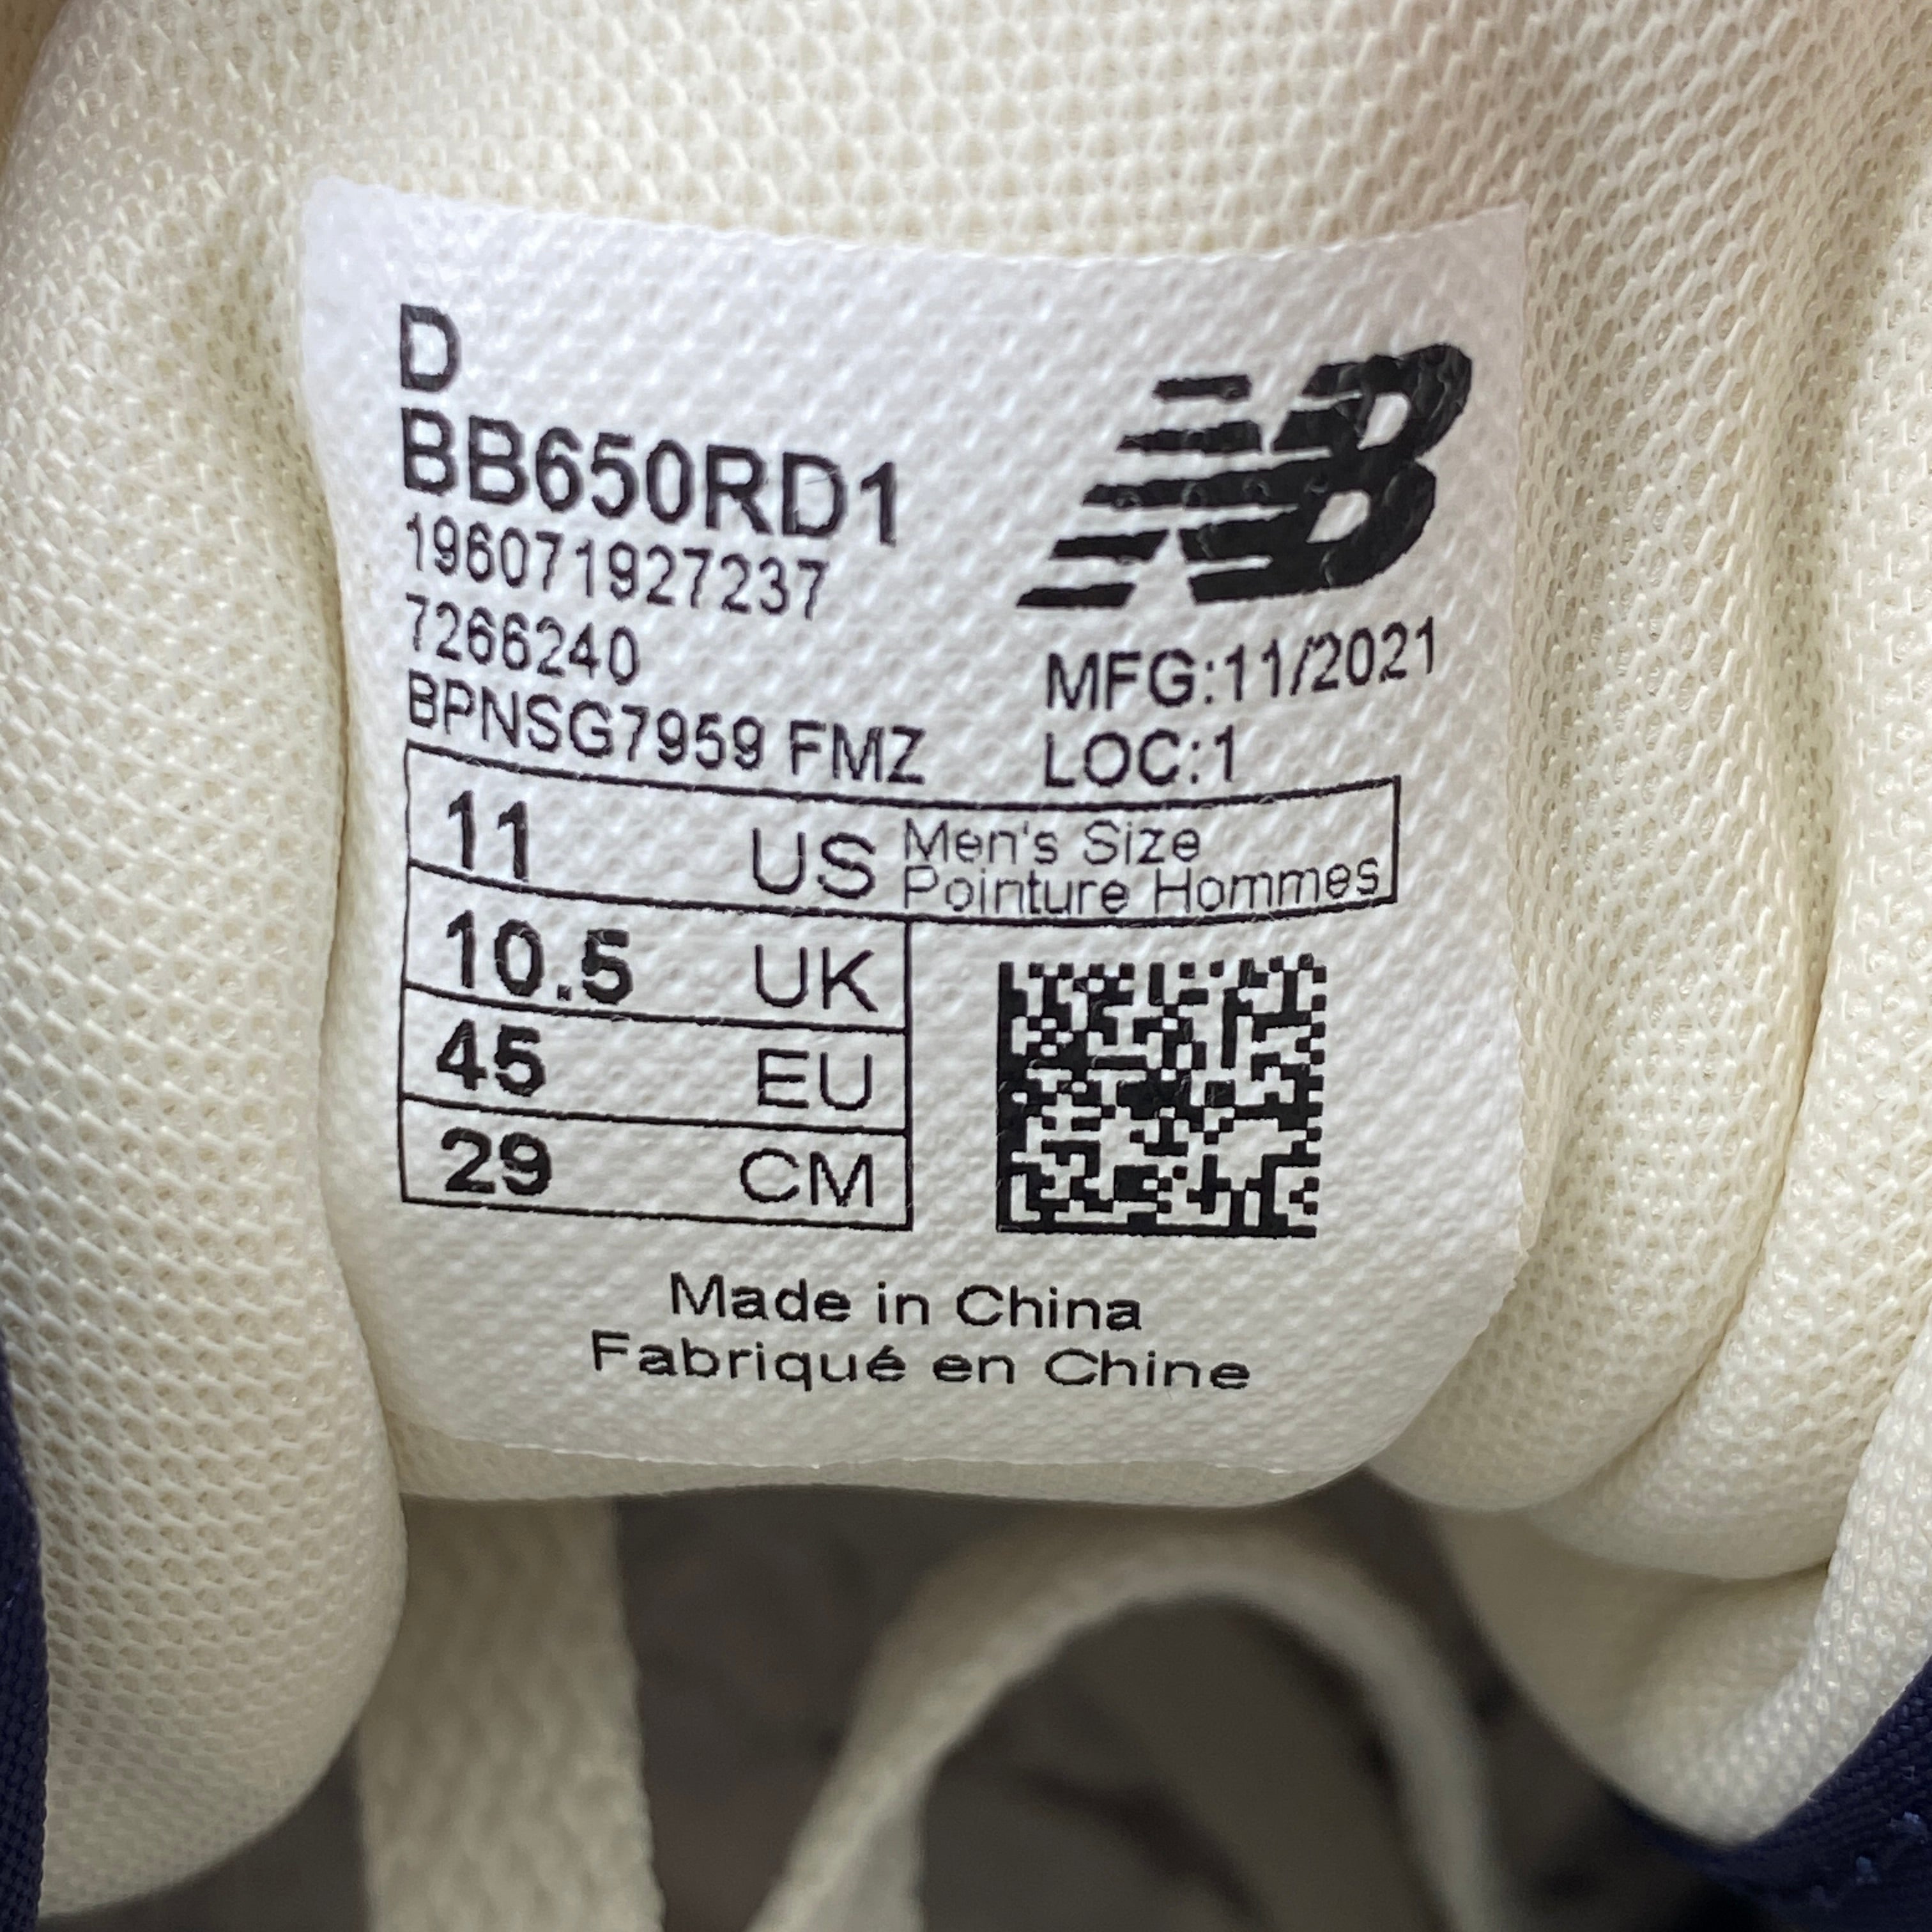 New Balance 650 / ALD &quot;White Navy&quot; 2021 New Size 11